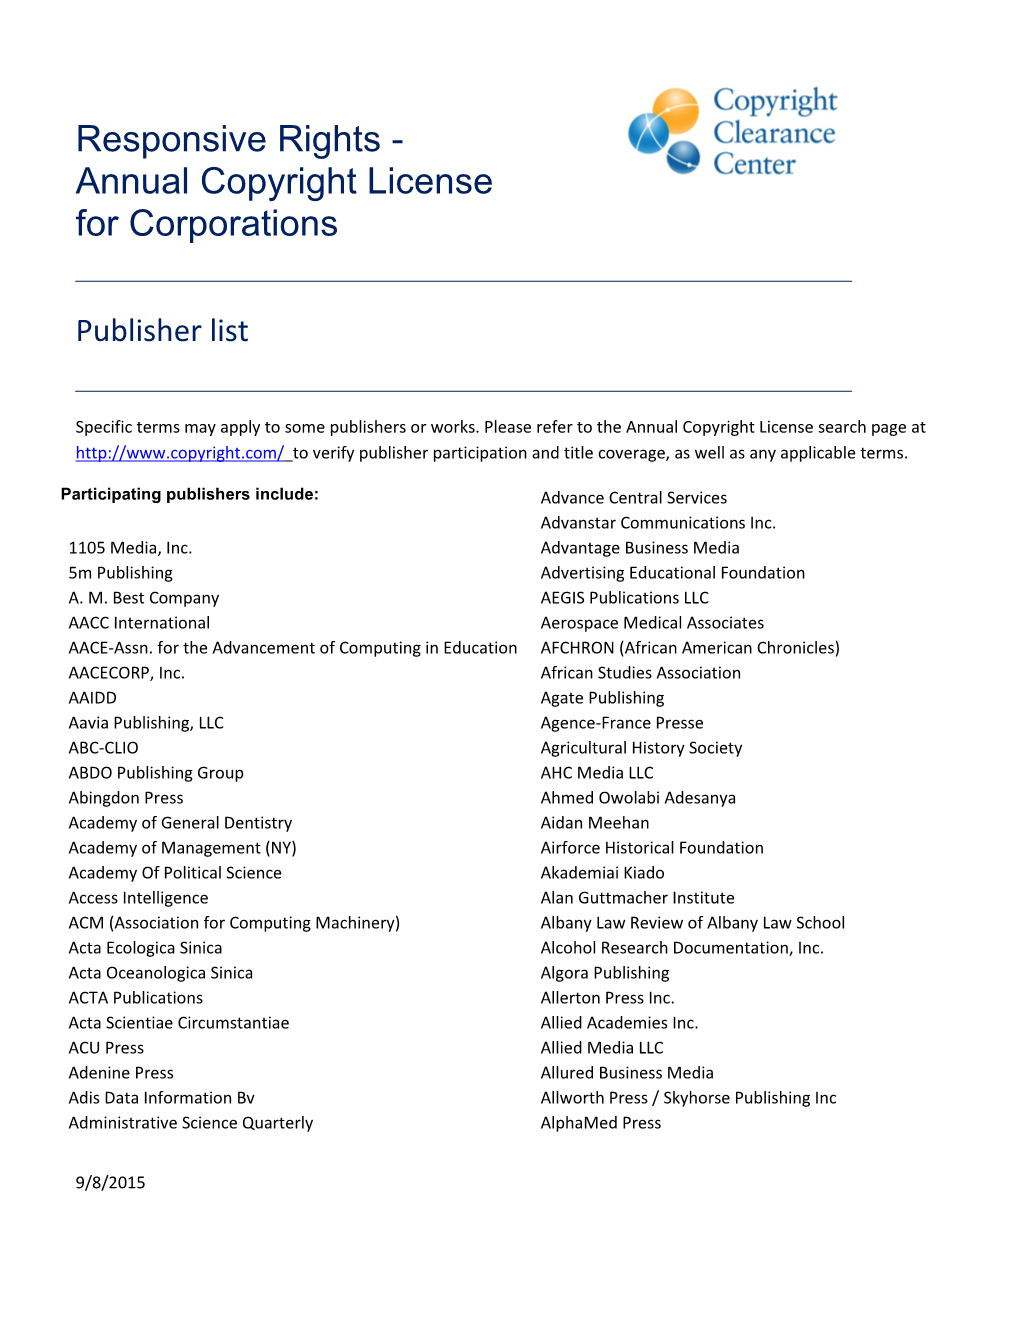 Annual Copyright License for Corporations